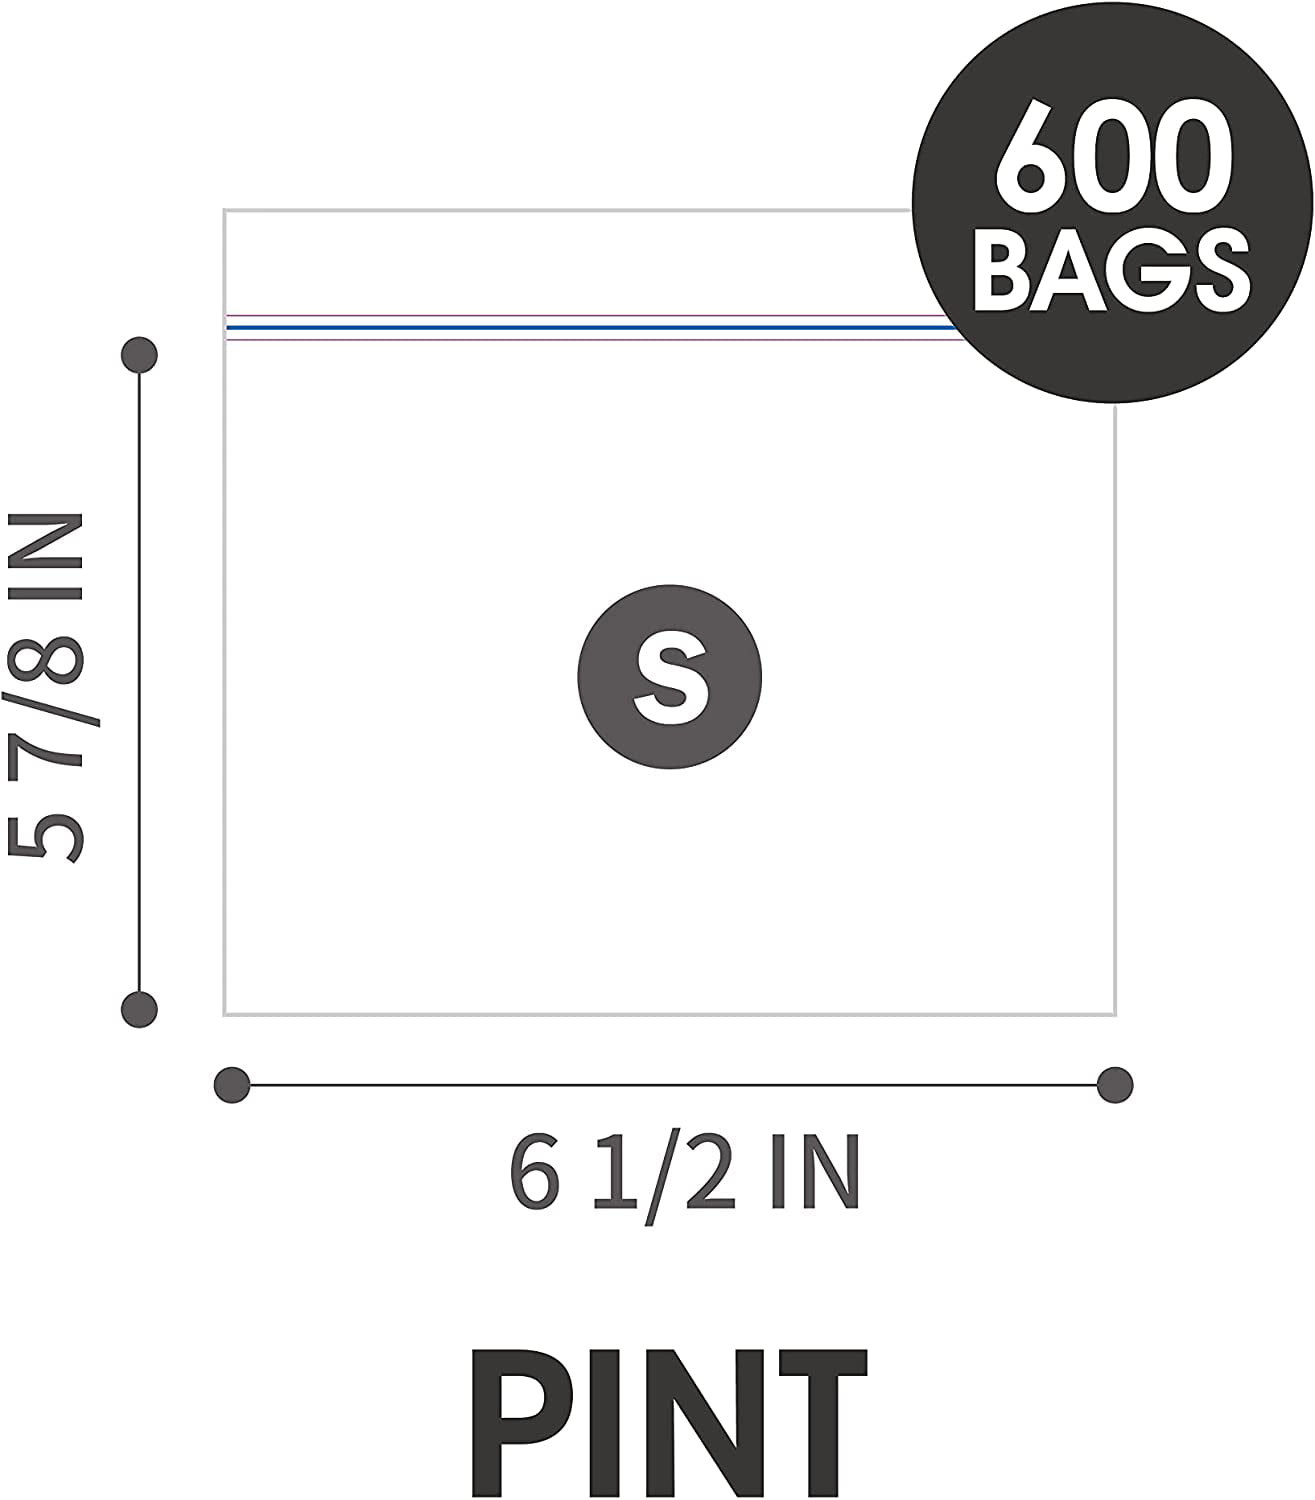 24/7 Bags - Double Zipper 2 Gallon Storage Bags, 50 Count (2 Packs of 25) 